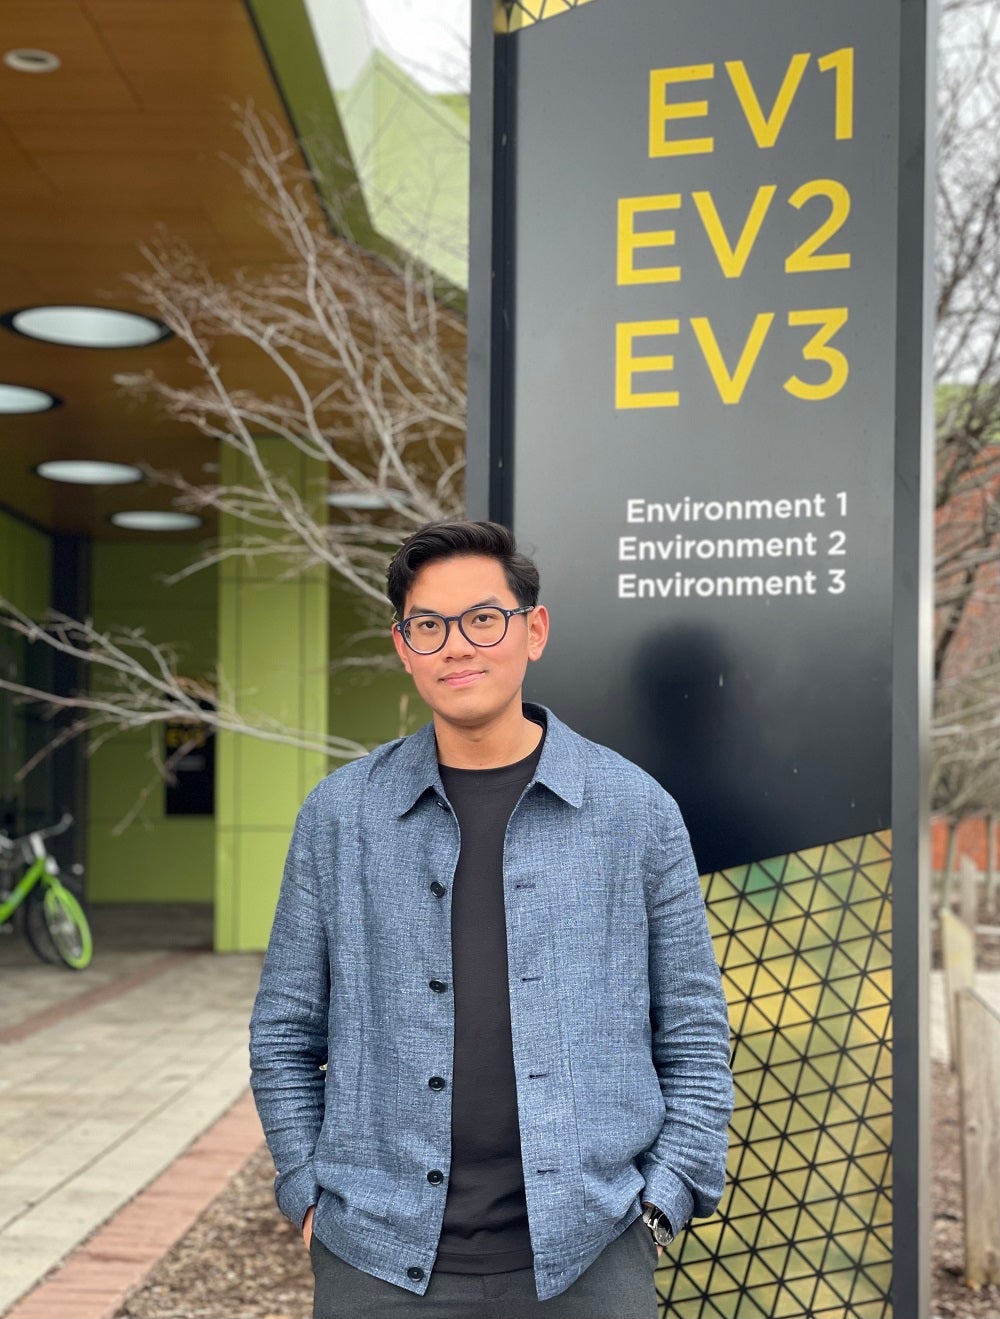 Ryan standing in front of the EV1, EV2 and EV3 sign